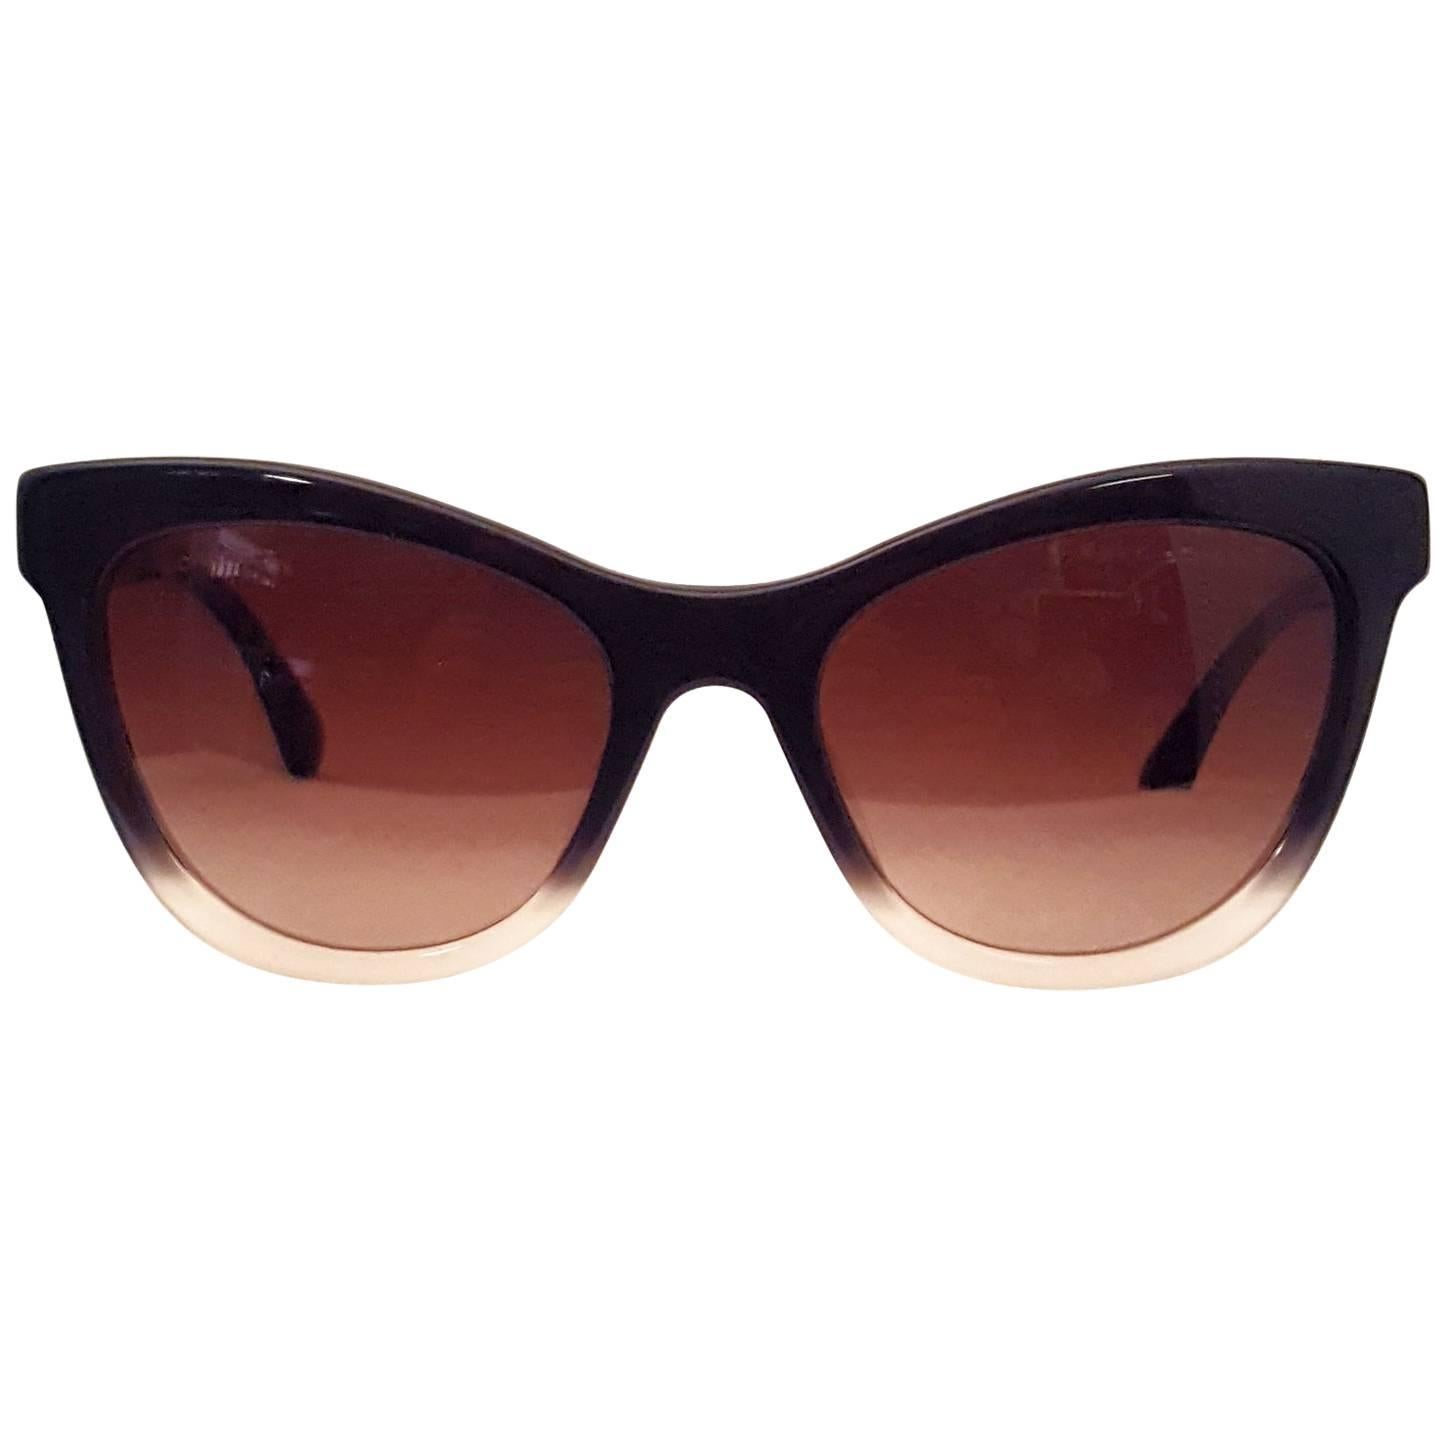 Chanel Cat Eye - 6 For Sale on 1stDibs  chanel cat eye sunglasses, chanel  cat-eye ch5415, chanel cateye sunglasses